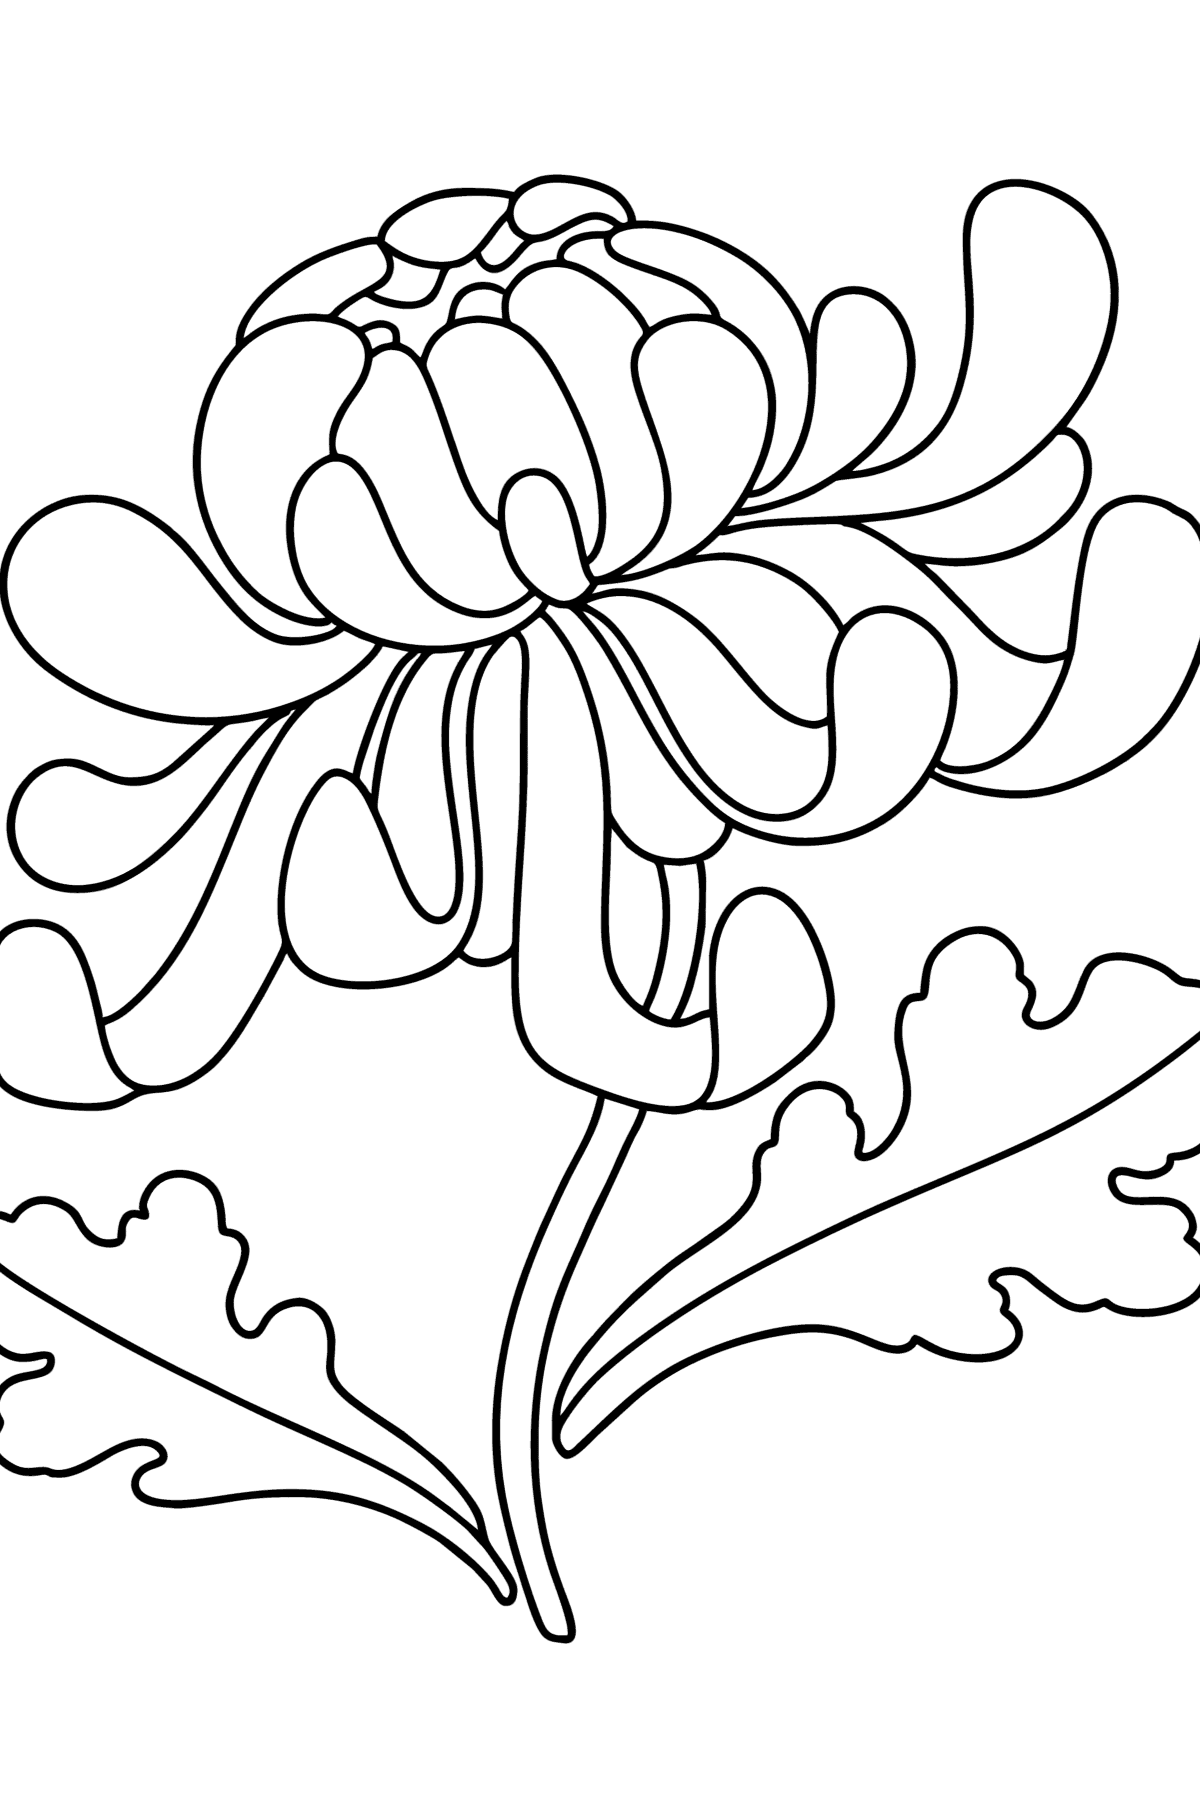 Chrysanthemums coloring page - Coloring Pages for Kids